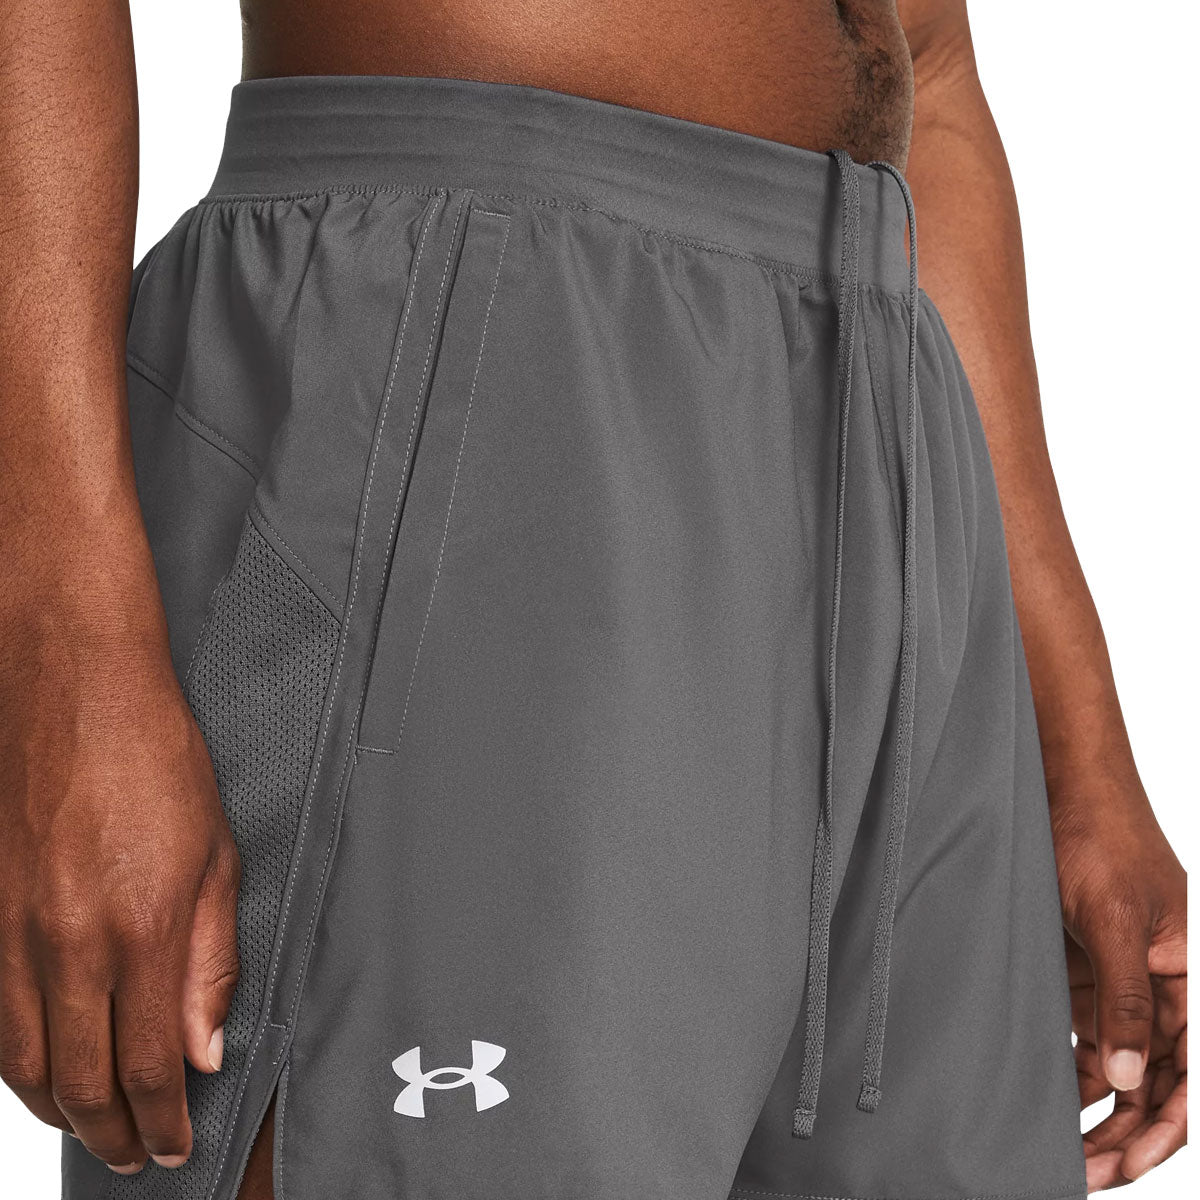 Under Armour Launch 5 inch Running Shorts - Mens - Castlerock/Reflective